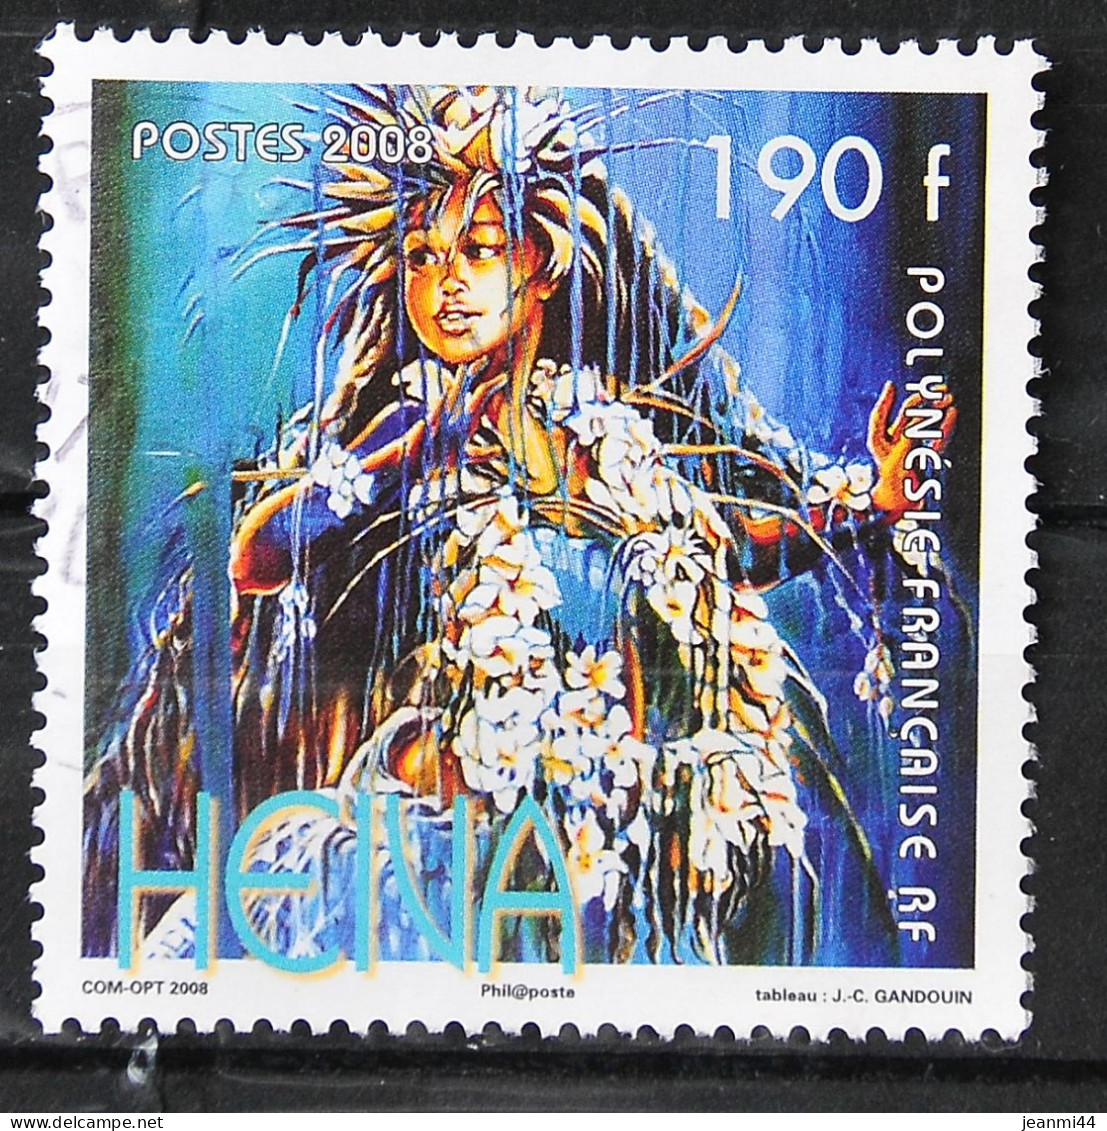 POLYNESIE FRANCAISE - 2008 - N° 839 HIEVA - Cachet à Date - Used Stamps